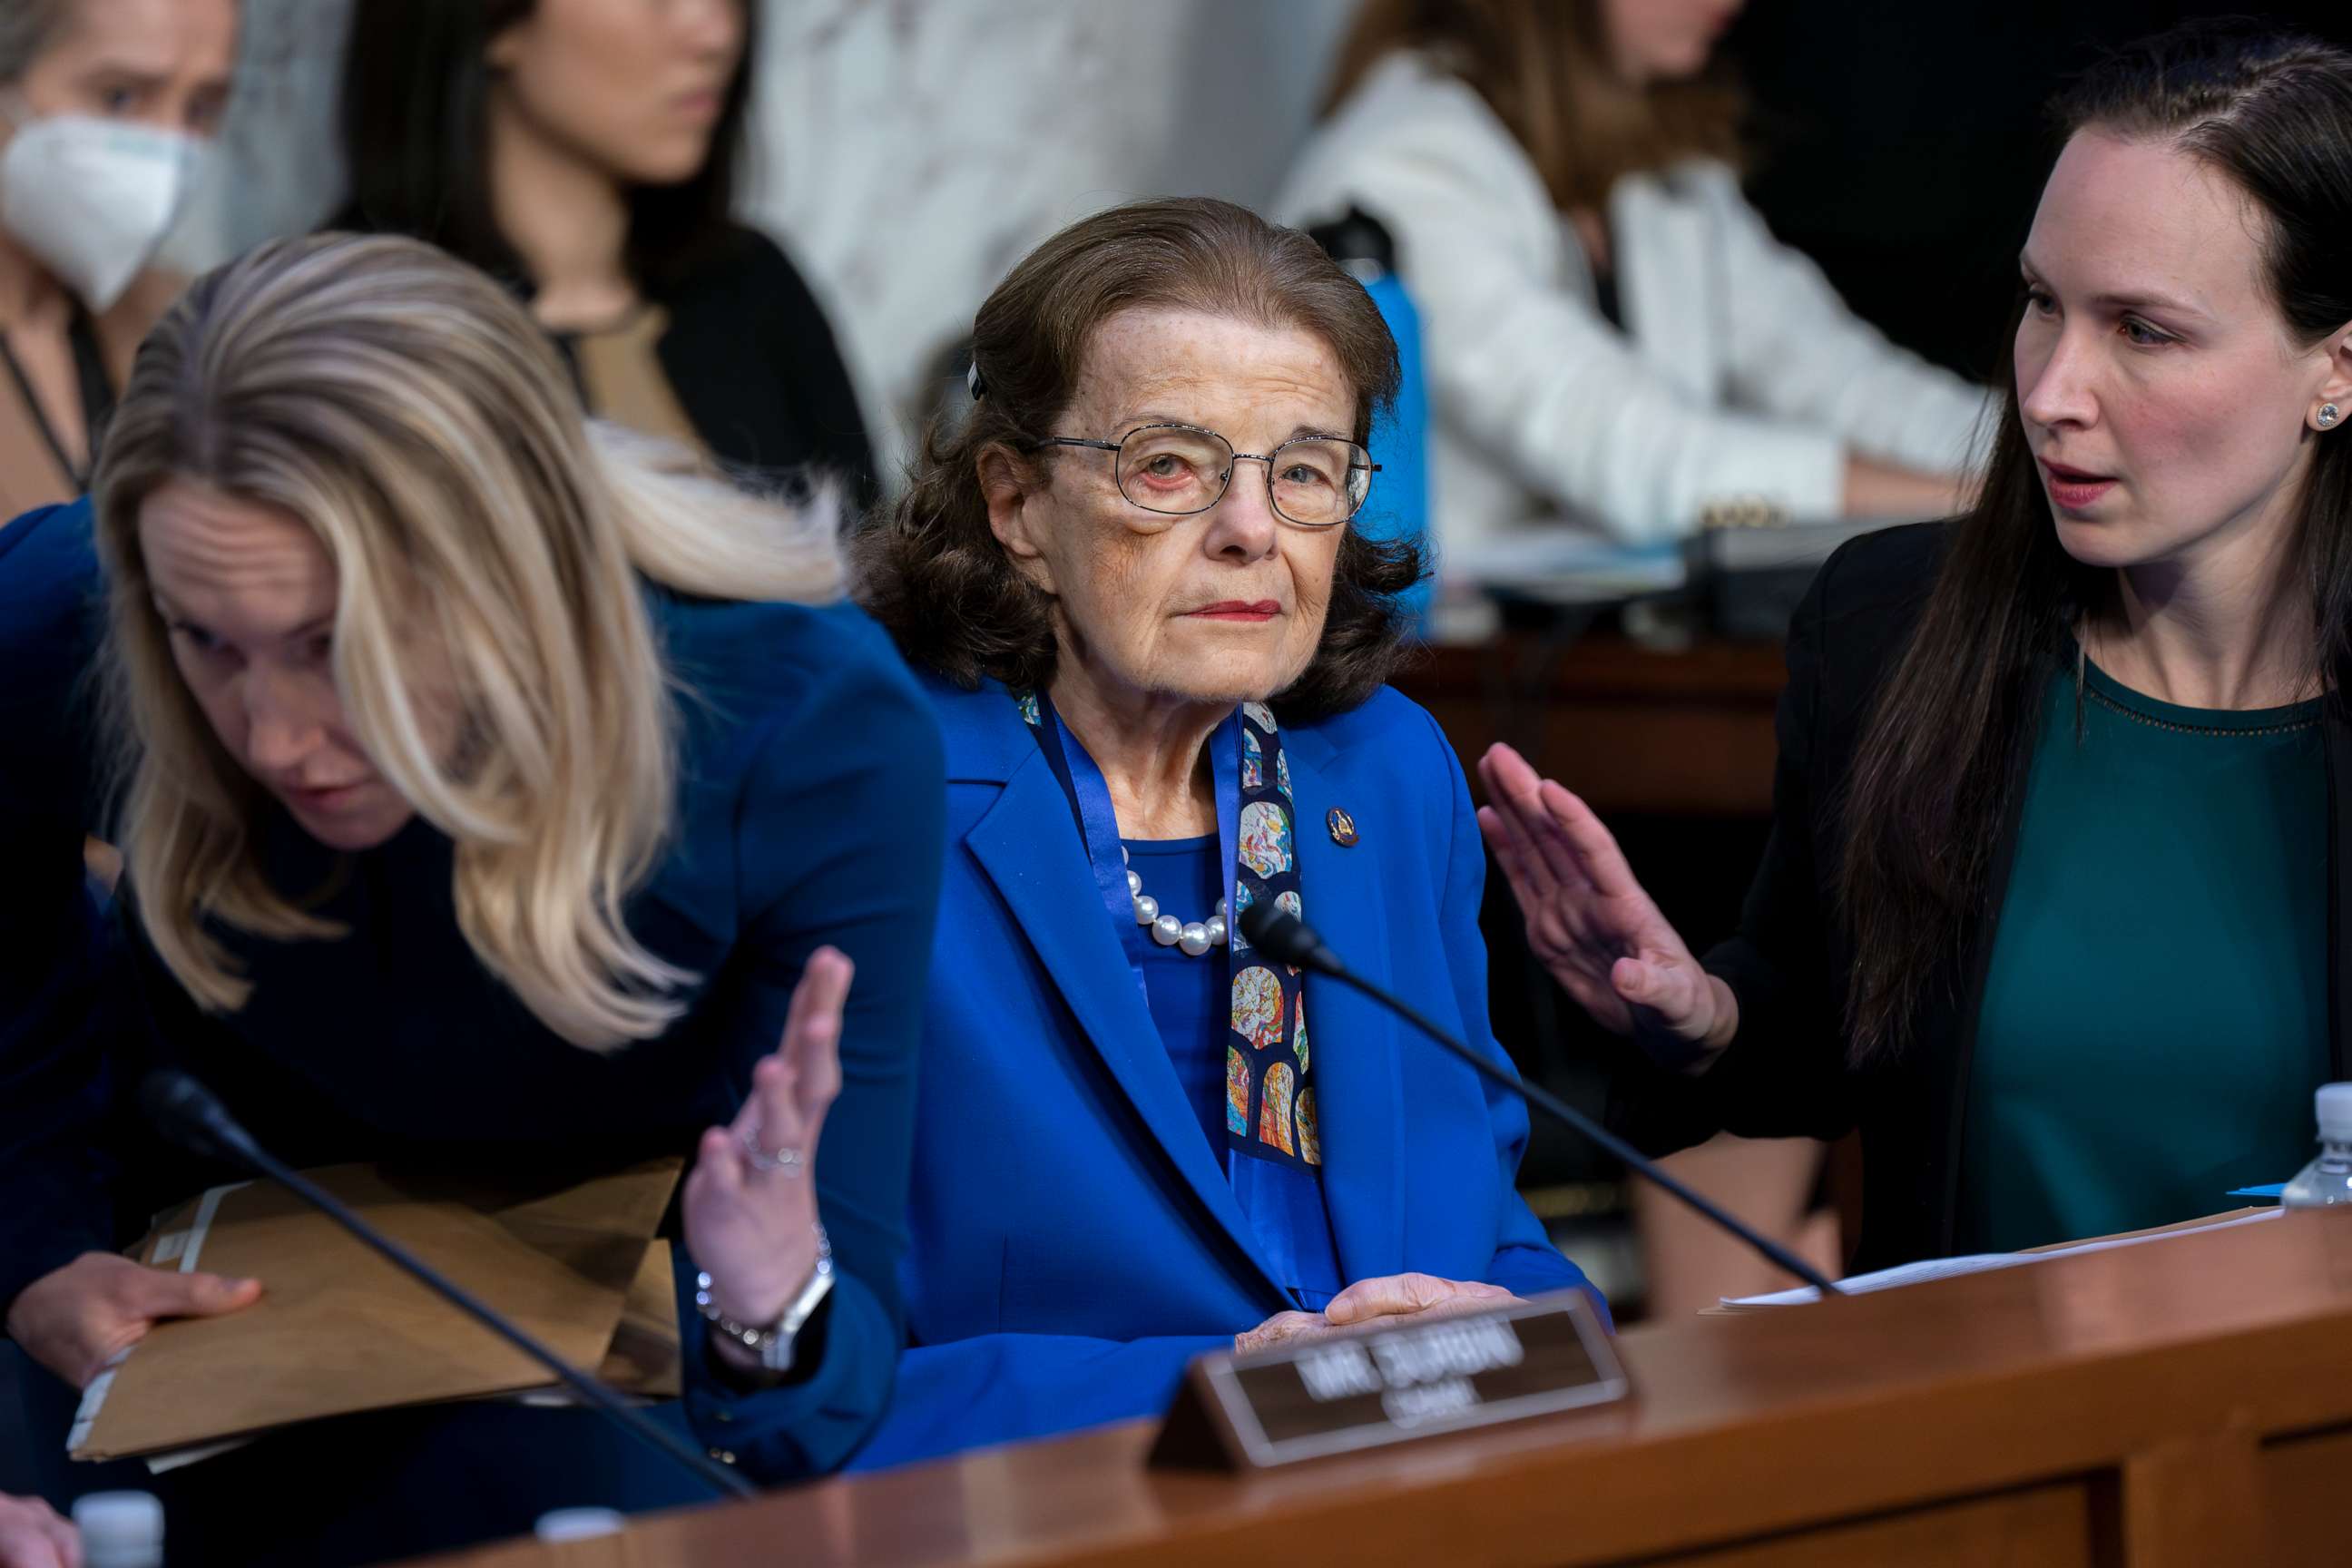 PHOTO: Sen. Dianne Feinstein, D-Calif., is flanked by aides as she returns to the Senate Judiciary Committee following a more than two-month absence as she was being treated for a case of shingles, at the Capitol in Washington, May 11, 2023.